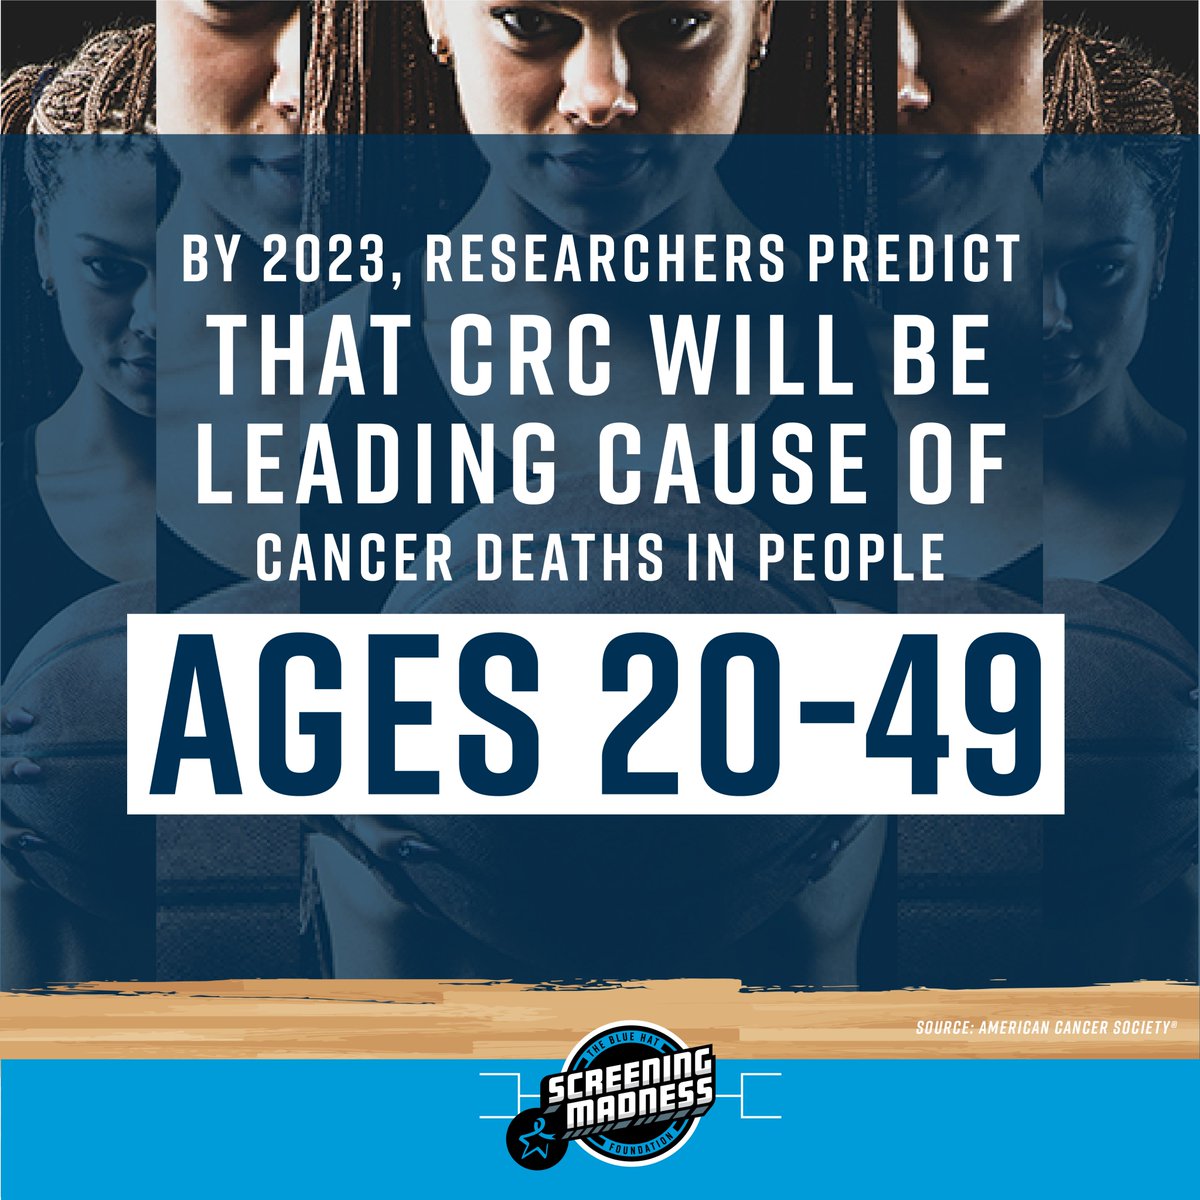 I was 35! 
Research shows colorectal cancer is estimated to become the leading cause of cancer-related deaths for ages 20-49 by 2030. It's called Early-onset CRC. That's why #ScreeningMadness is important. For more info dana-farber.org/young-onset-co…